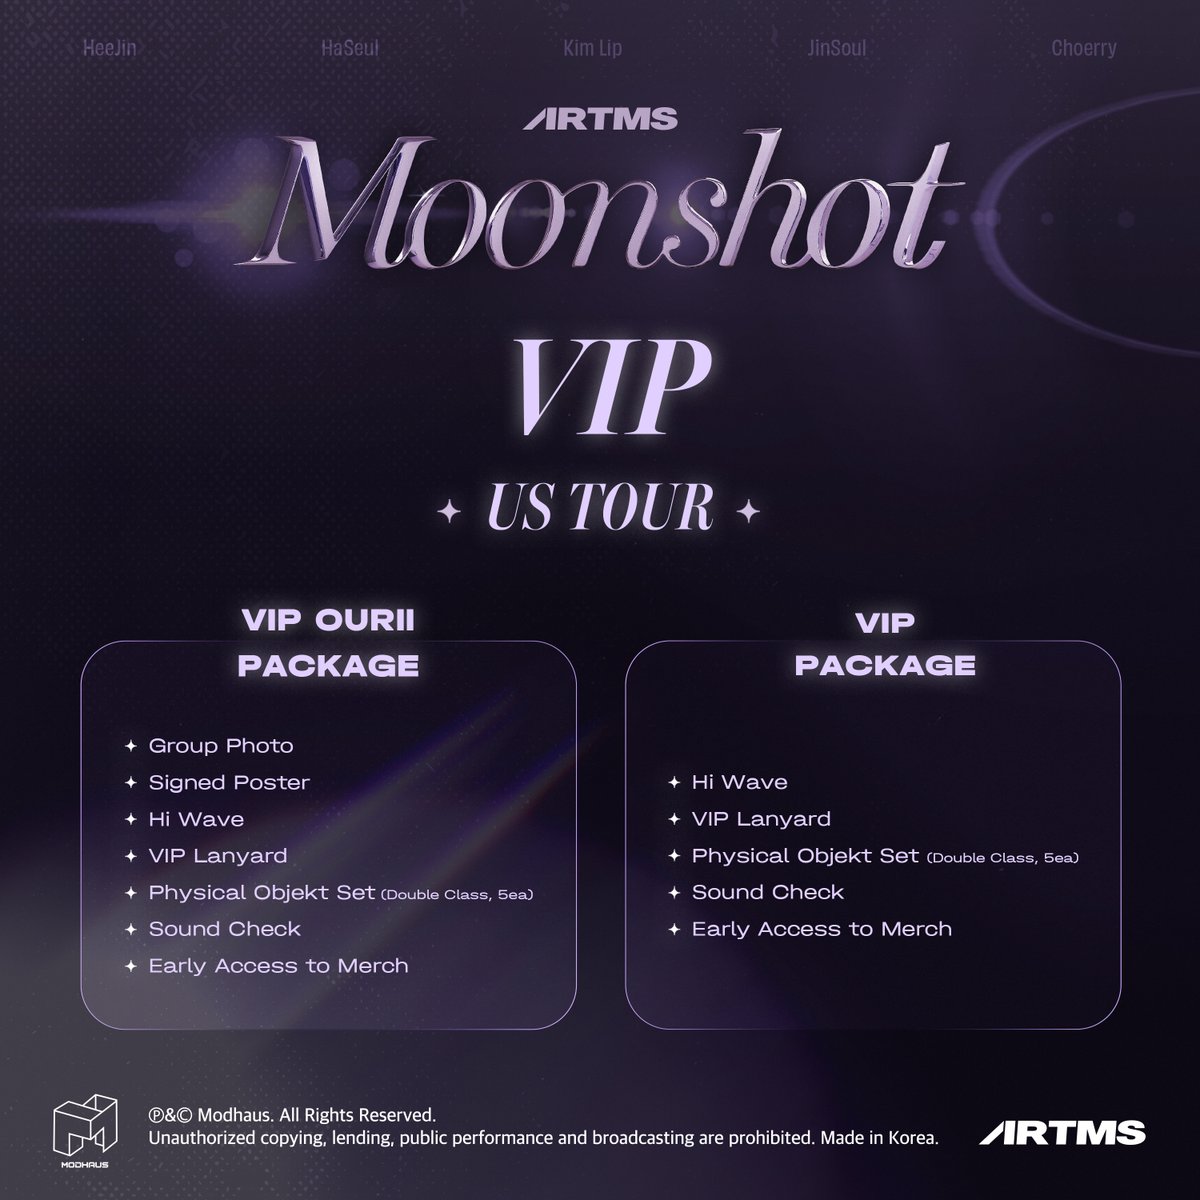 2024 ARTMS World Tour <Moonshot> in US

🎟️ VIP Package sales
05.24.2024 09:00 AM PST
bit.ly/3ym17E1

🎫 General Ticket sales
05.17.2024 9AM PST
📍 08.16.2024 NEW YORK, NY  :link: bit.ly/3USWutT
📍08.19.2024 ATLANTA, GA  :link: bit.ly/3y6oEsr